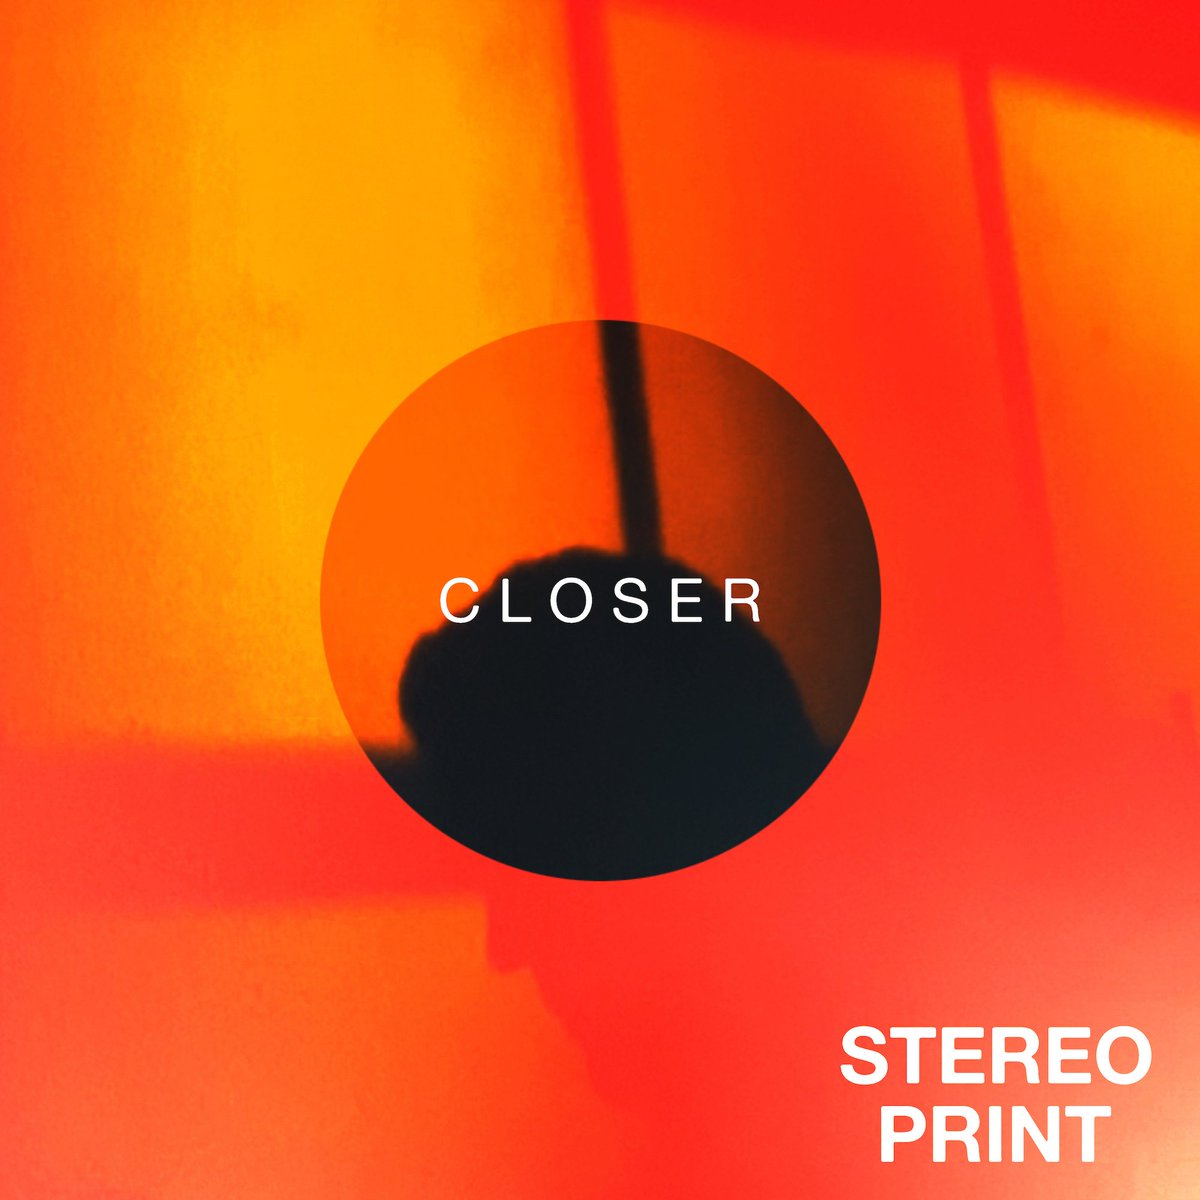 Listen to the single 'Closer' and enjoy this amazing song from Stereo Print.
#indiedockmusicblog #singlereview #electronicpop #alternativepop #indiepop #electronic

indiedockmusicblog.co.uk/?p=18439&fbcli…